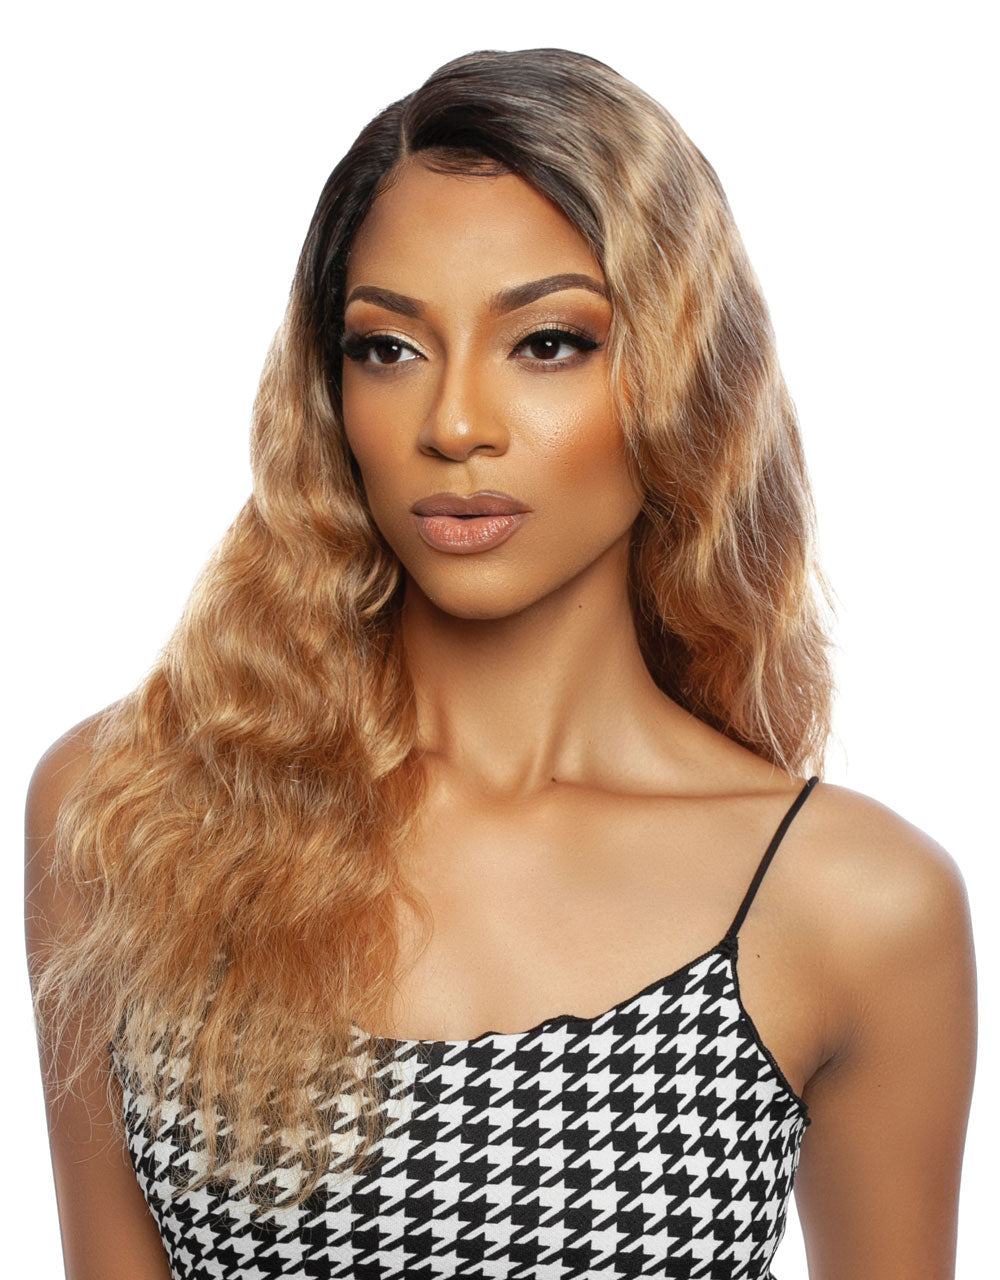 TRILL - TROC214 - 13A OMBRE HONEY BLONDE BODY WAVE WIG